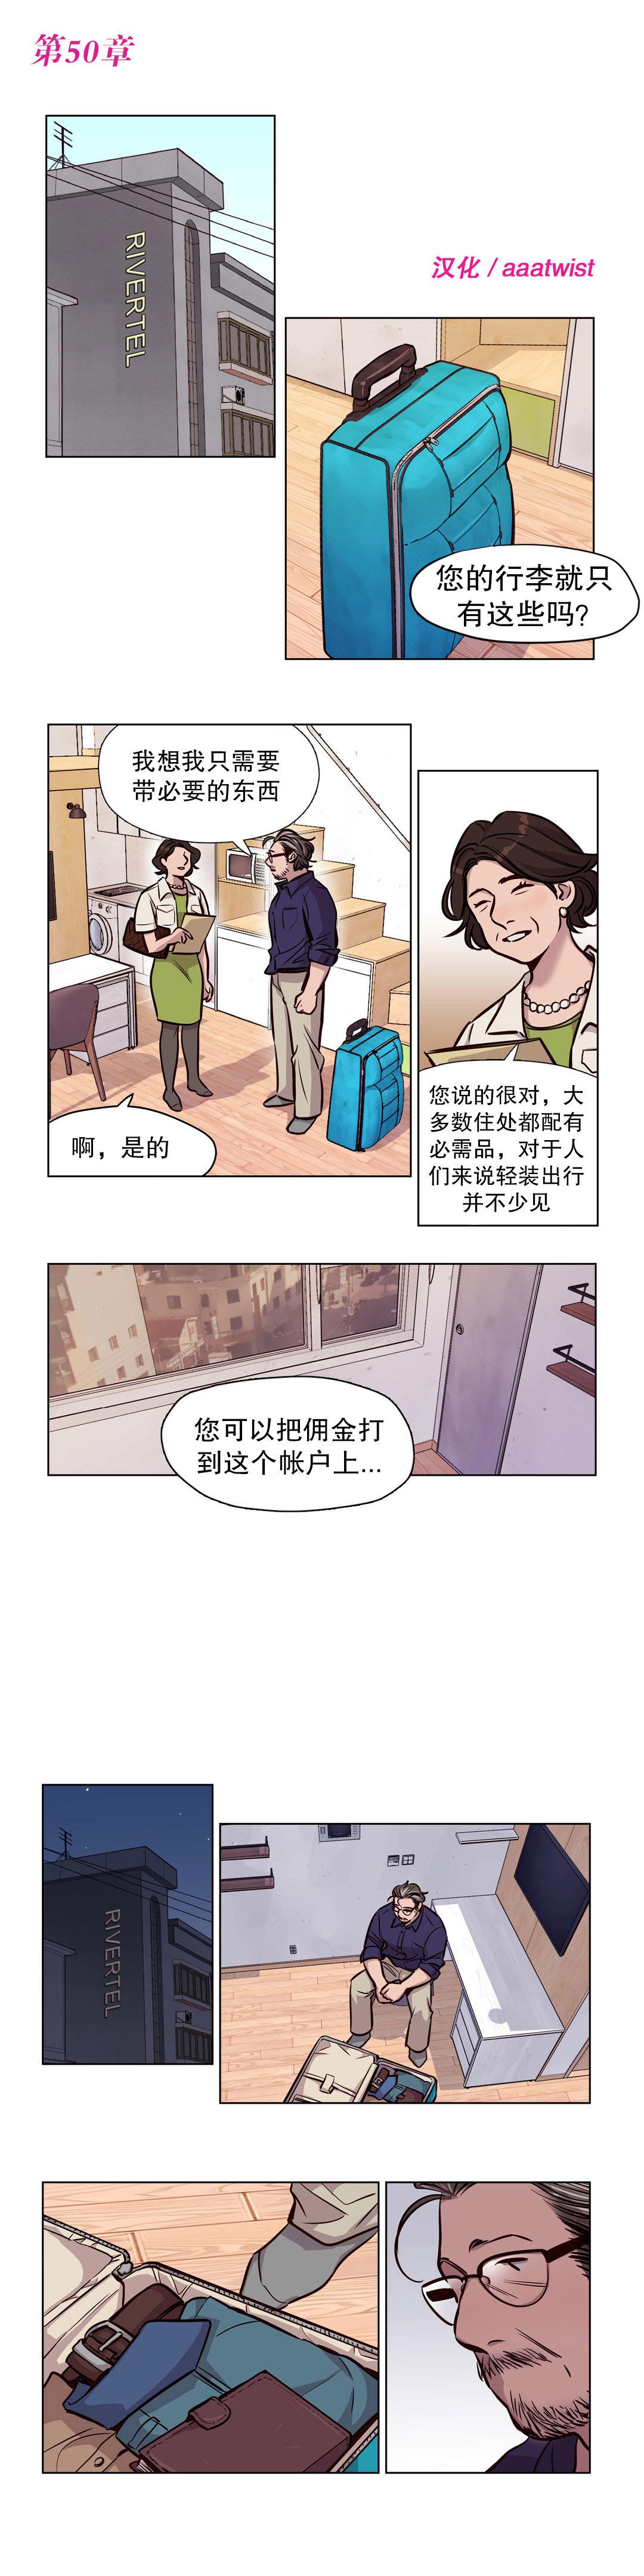 [Ramjak] 赎罪营(Atonement Camp) Ch.50-52 (Chinese) 0